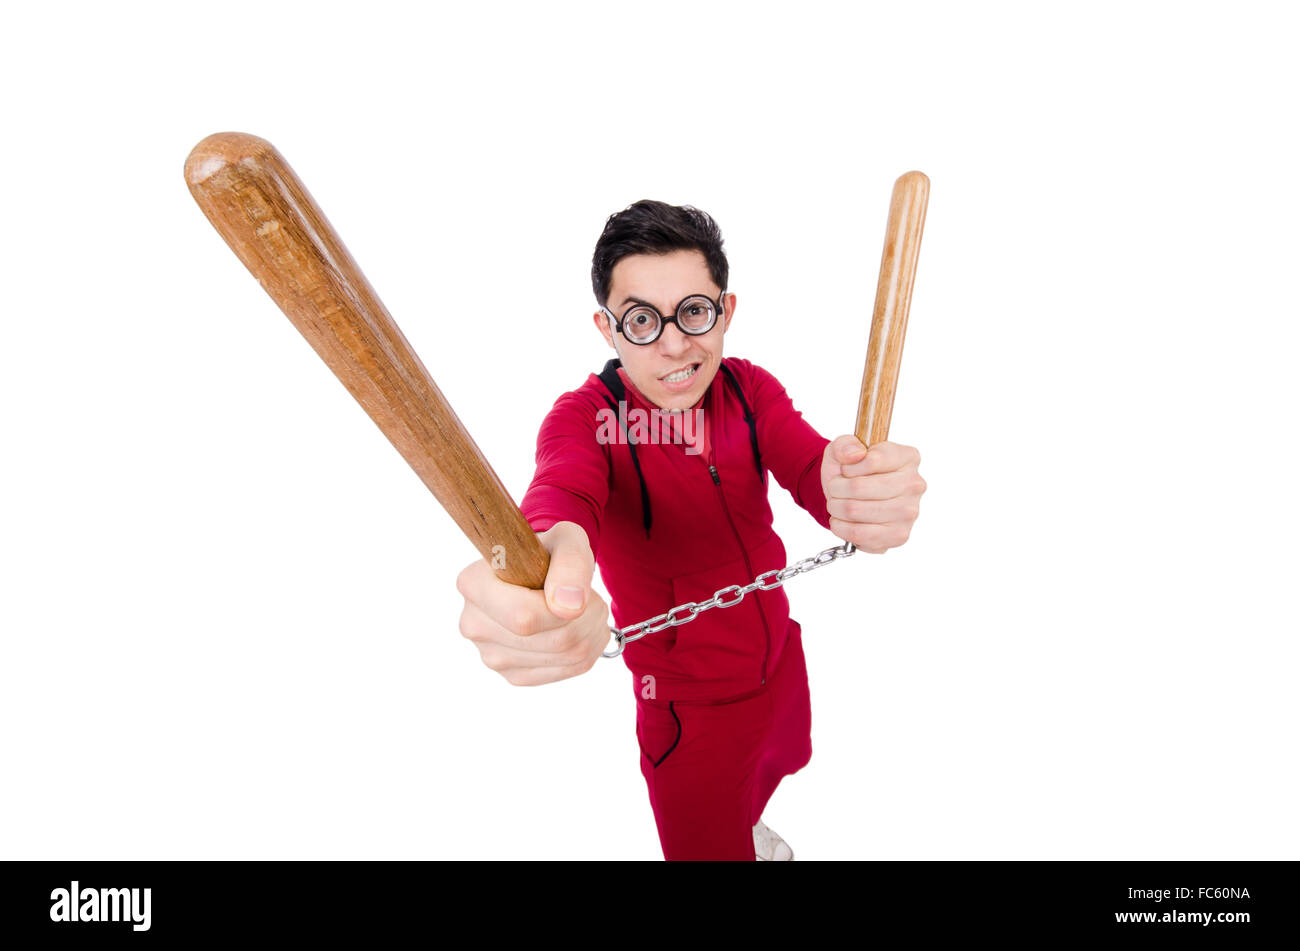 Funny sportsman with nunchuks isolated on white Stock Photo